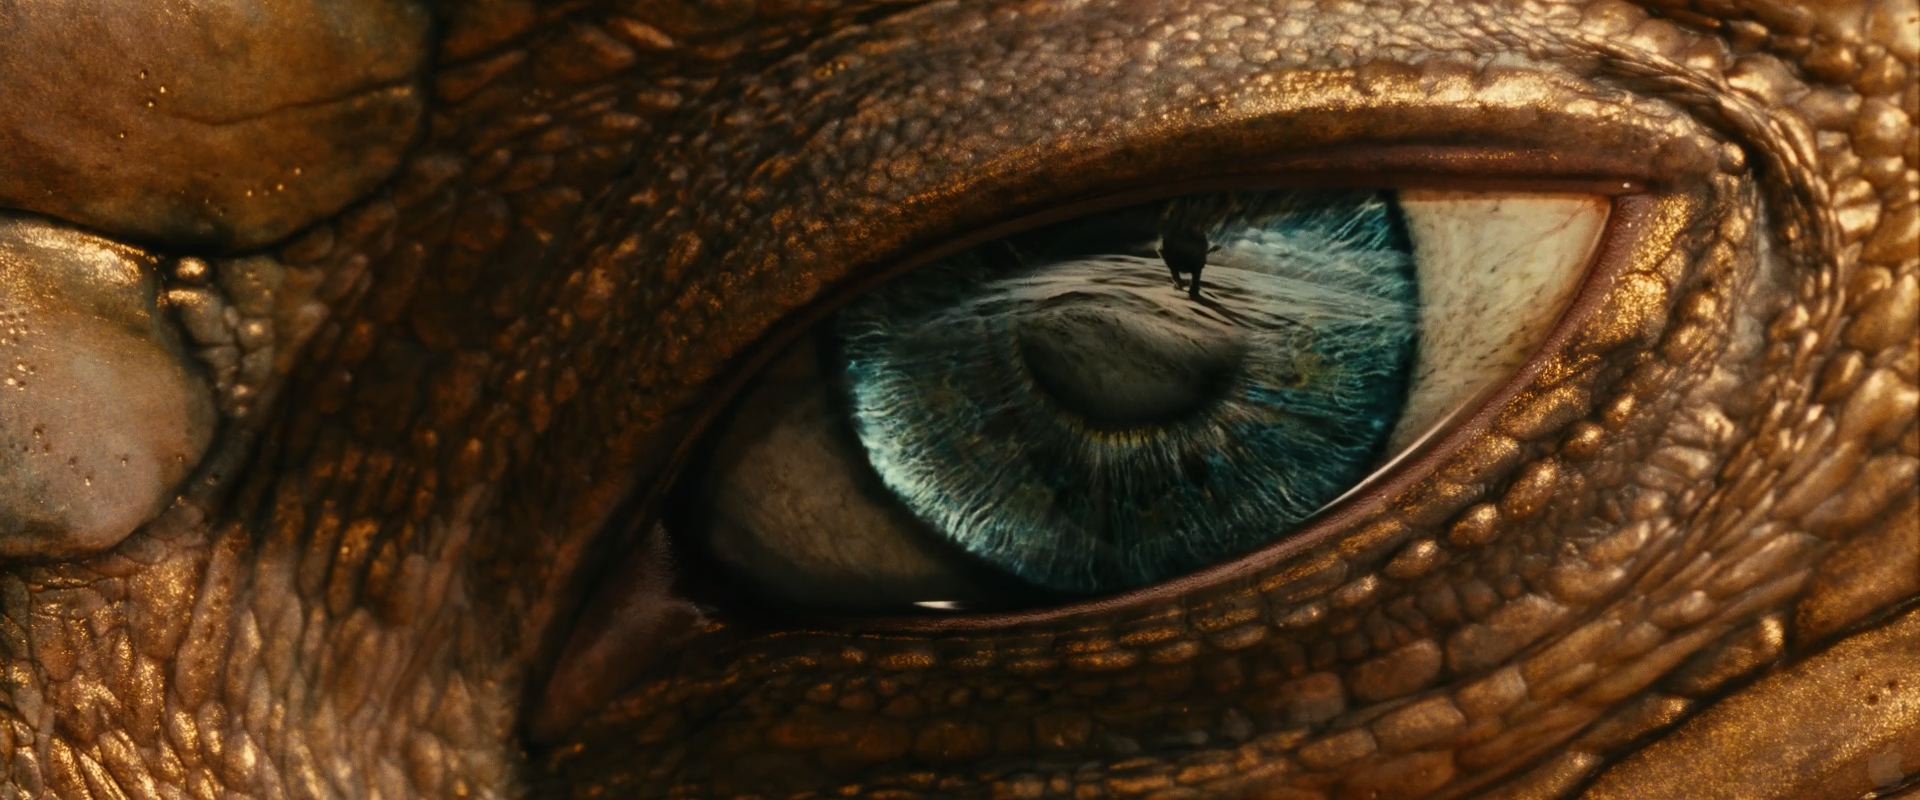 Eye of the Dragon from Chronicles of Narnia Voyage of the Dawn ...